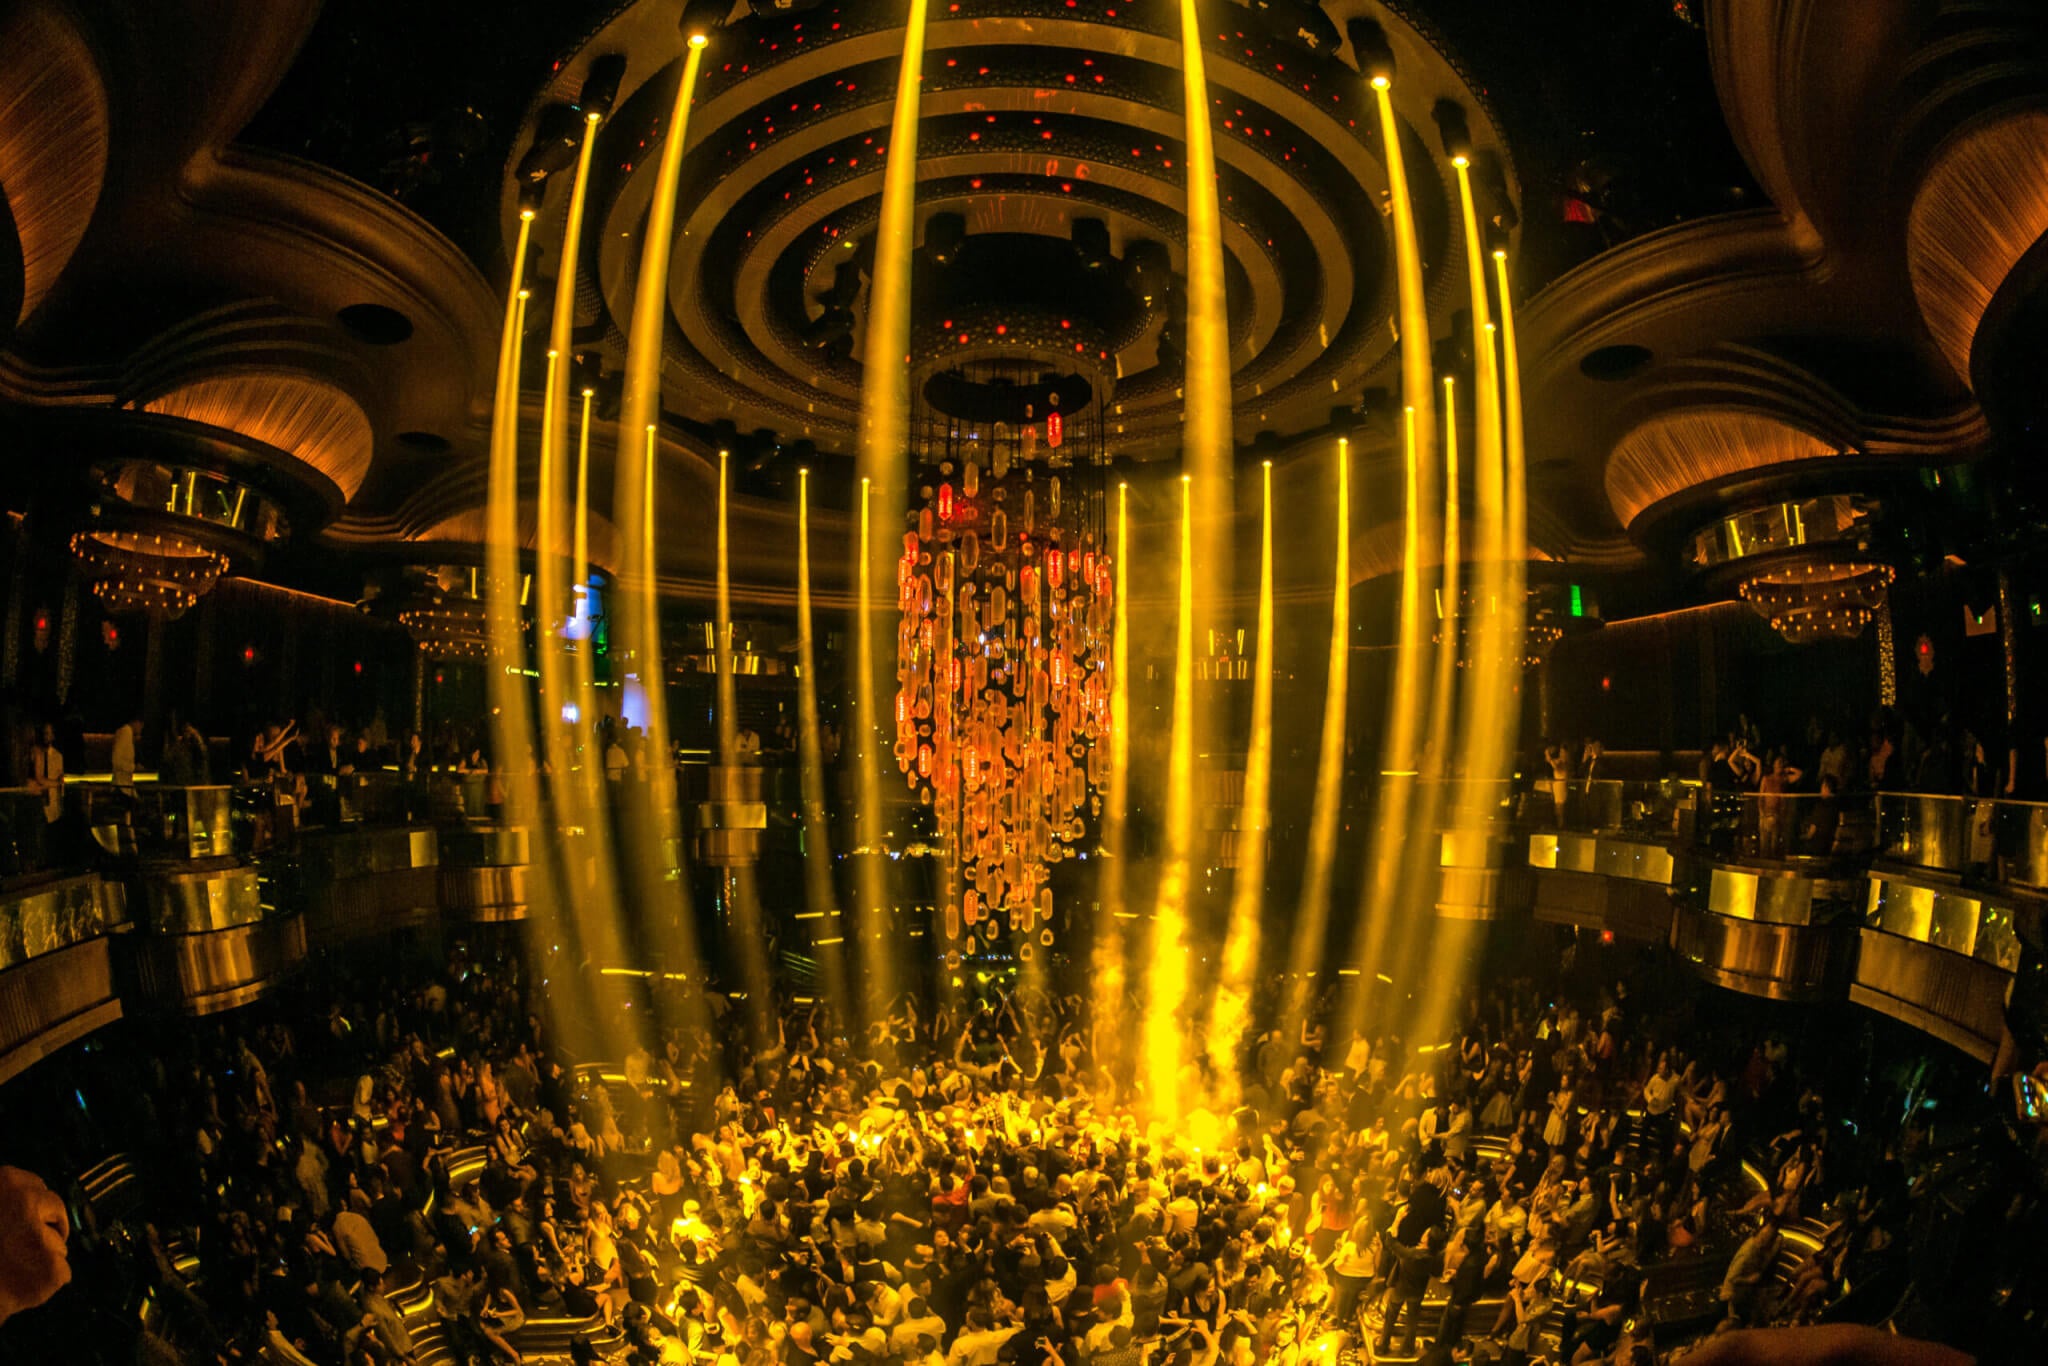 OMNIA Chandelier and Crowd